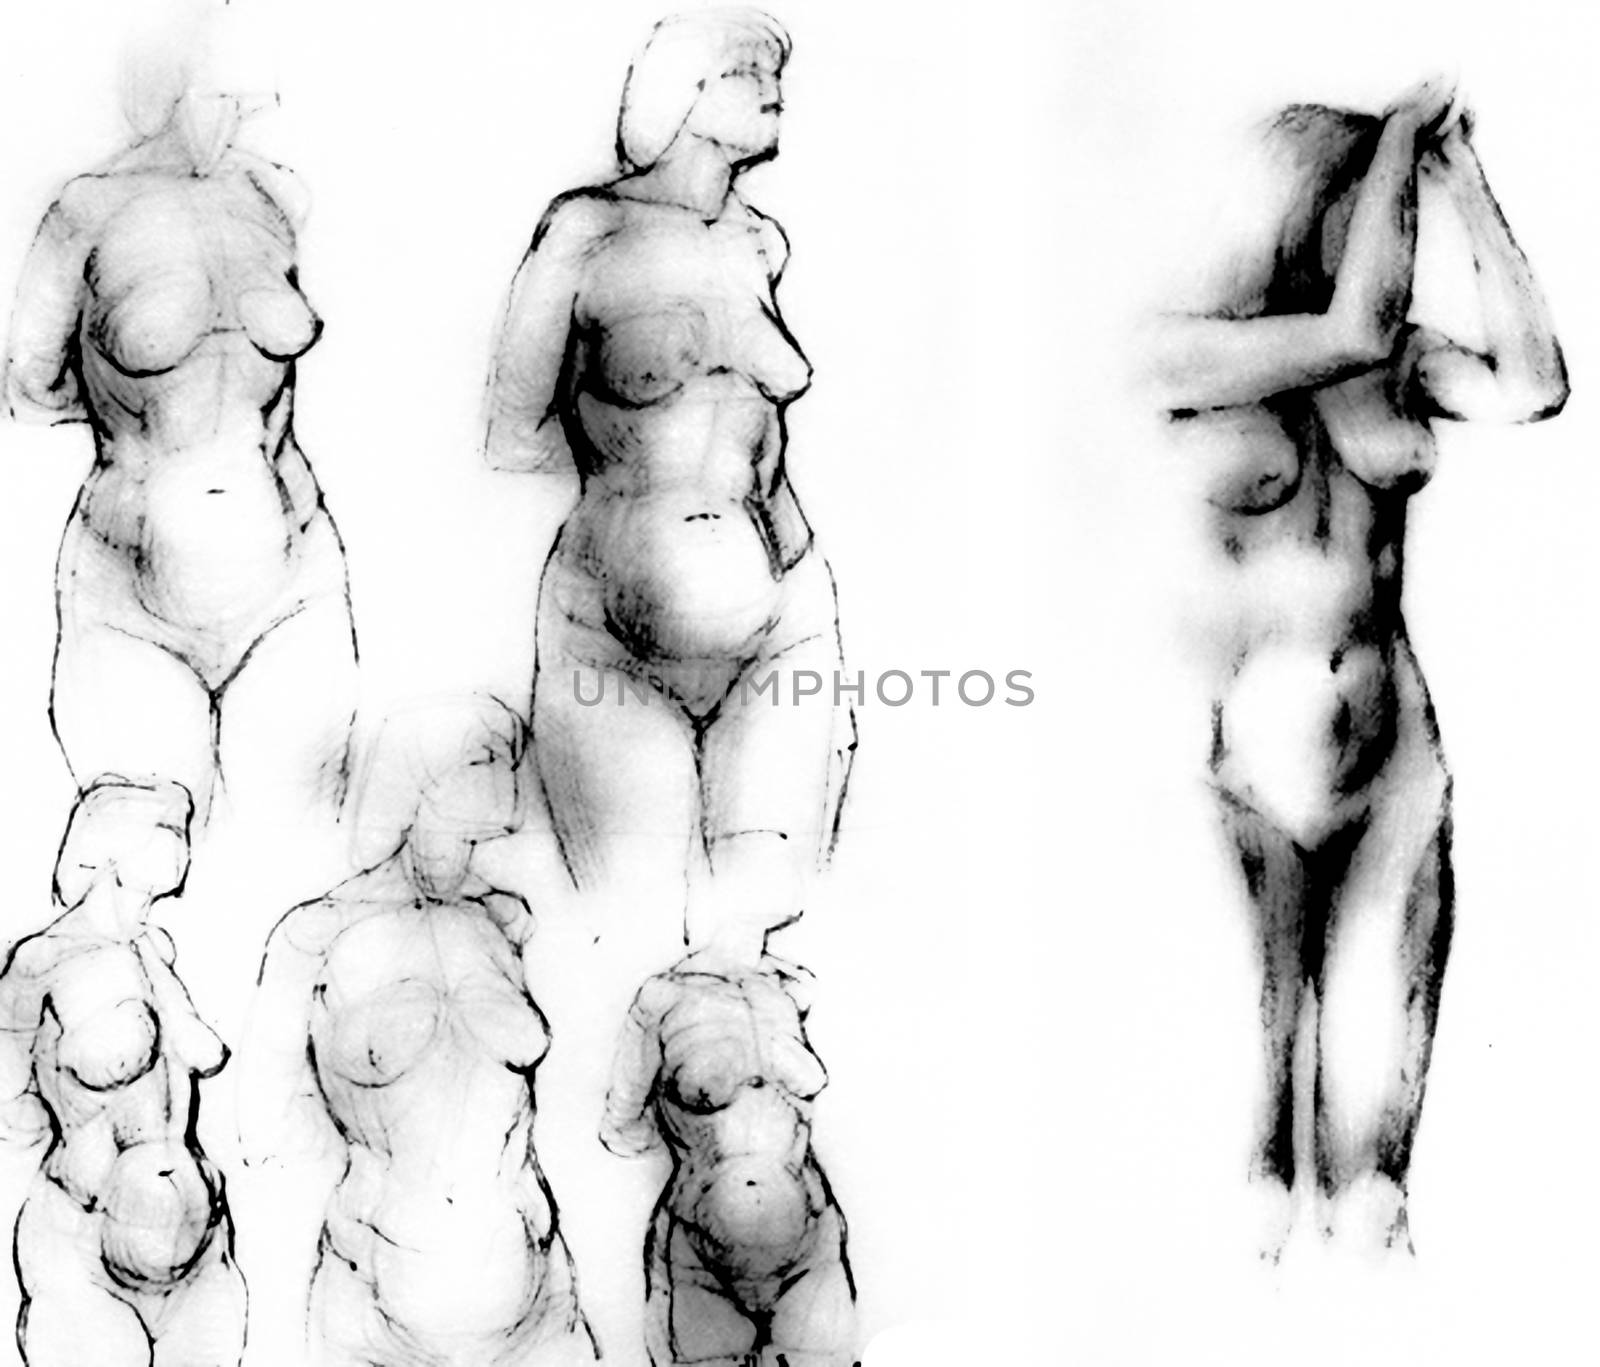 Tutorial of drawing female body. Drawing the human body, step by step lessons. by DePo